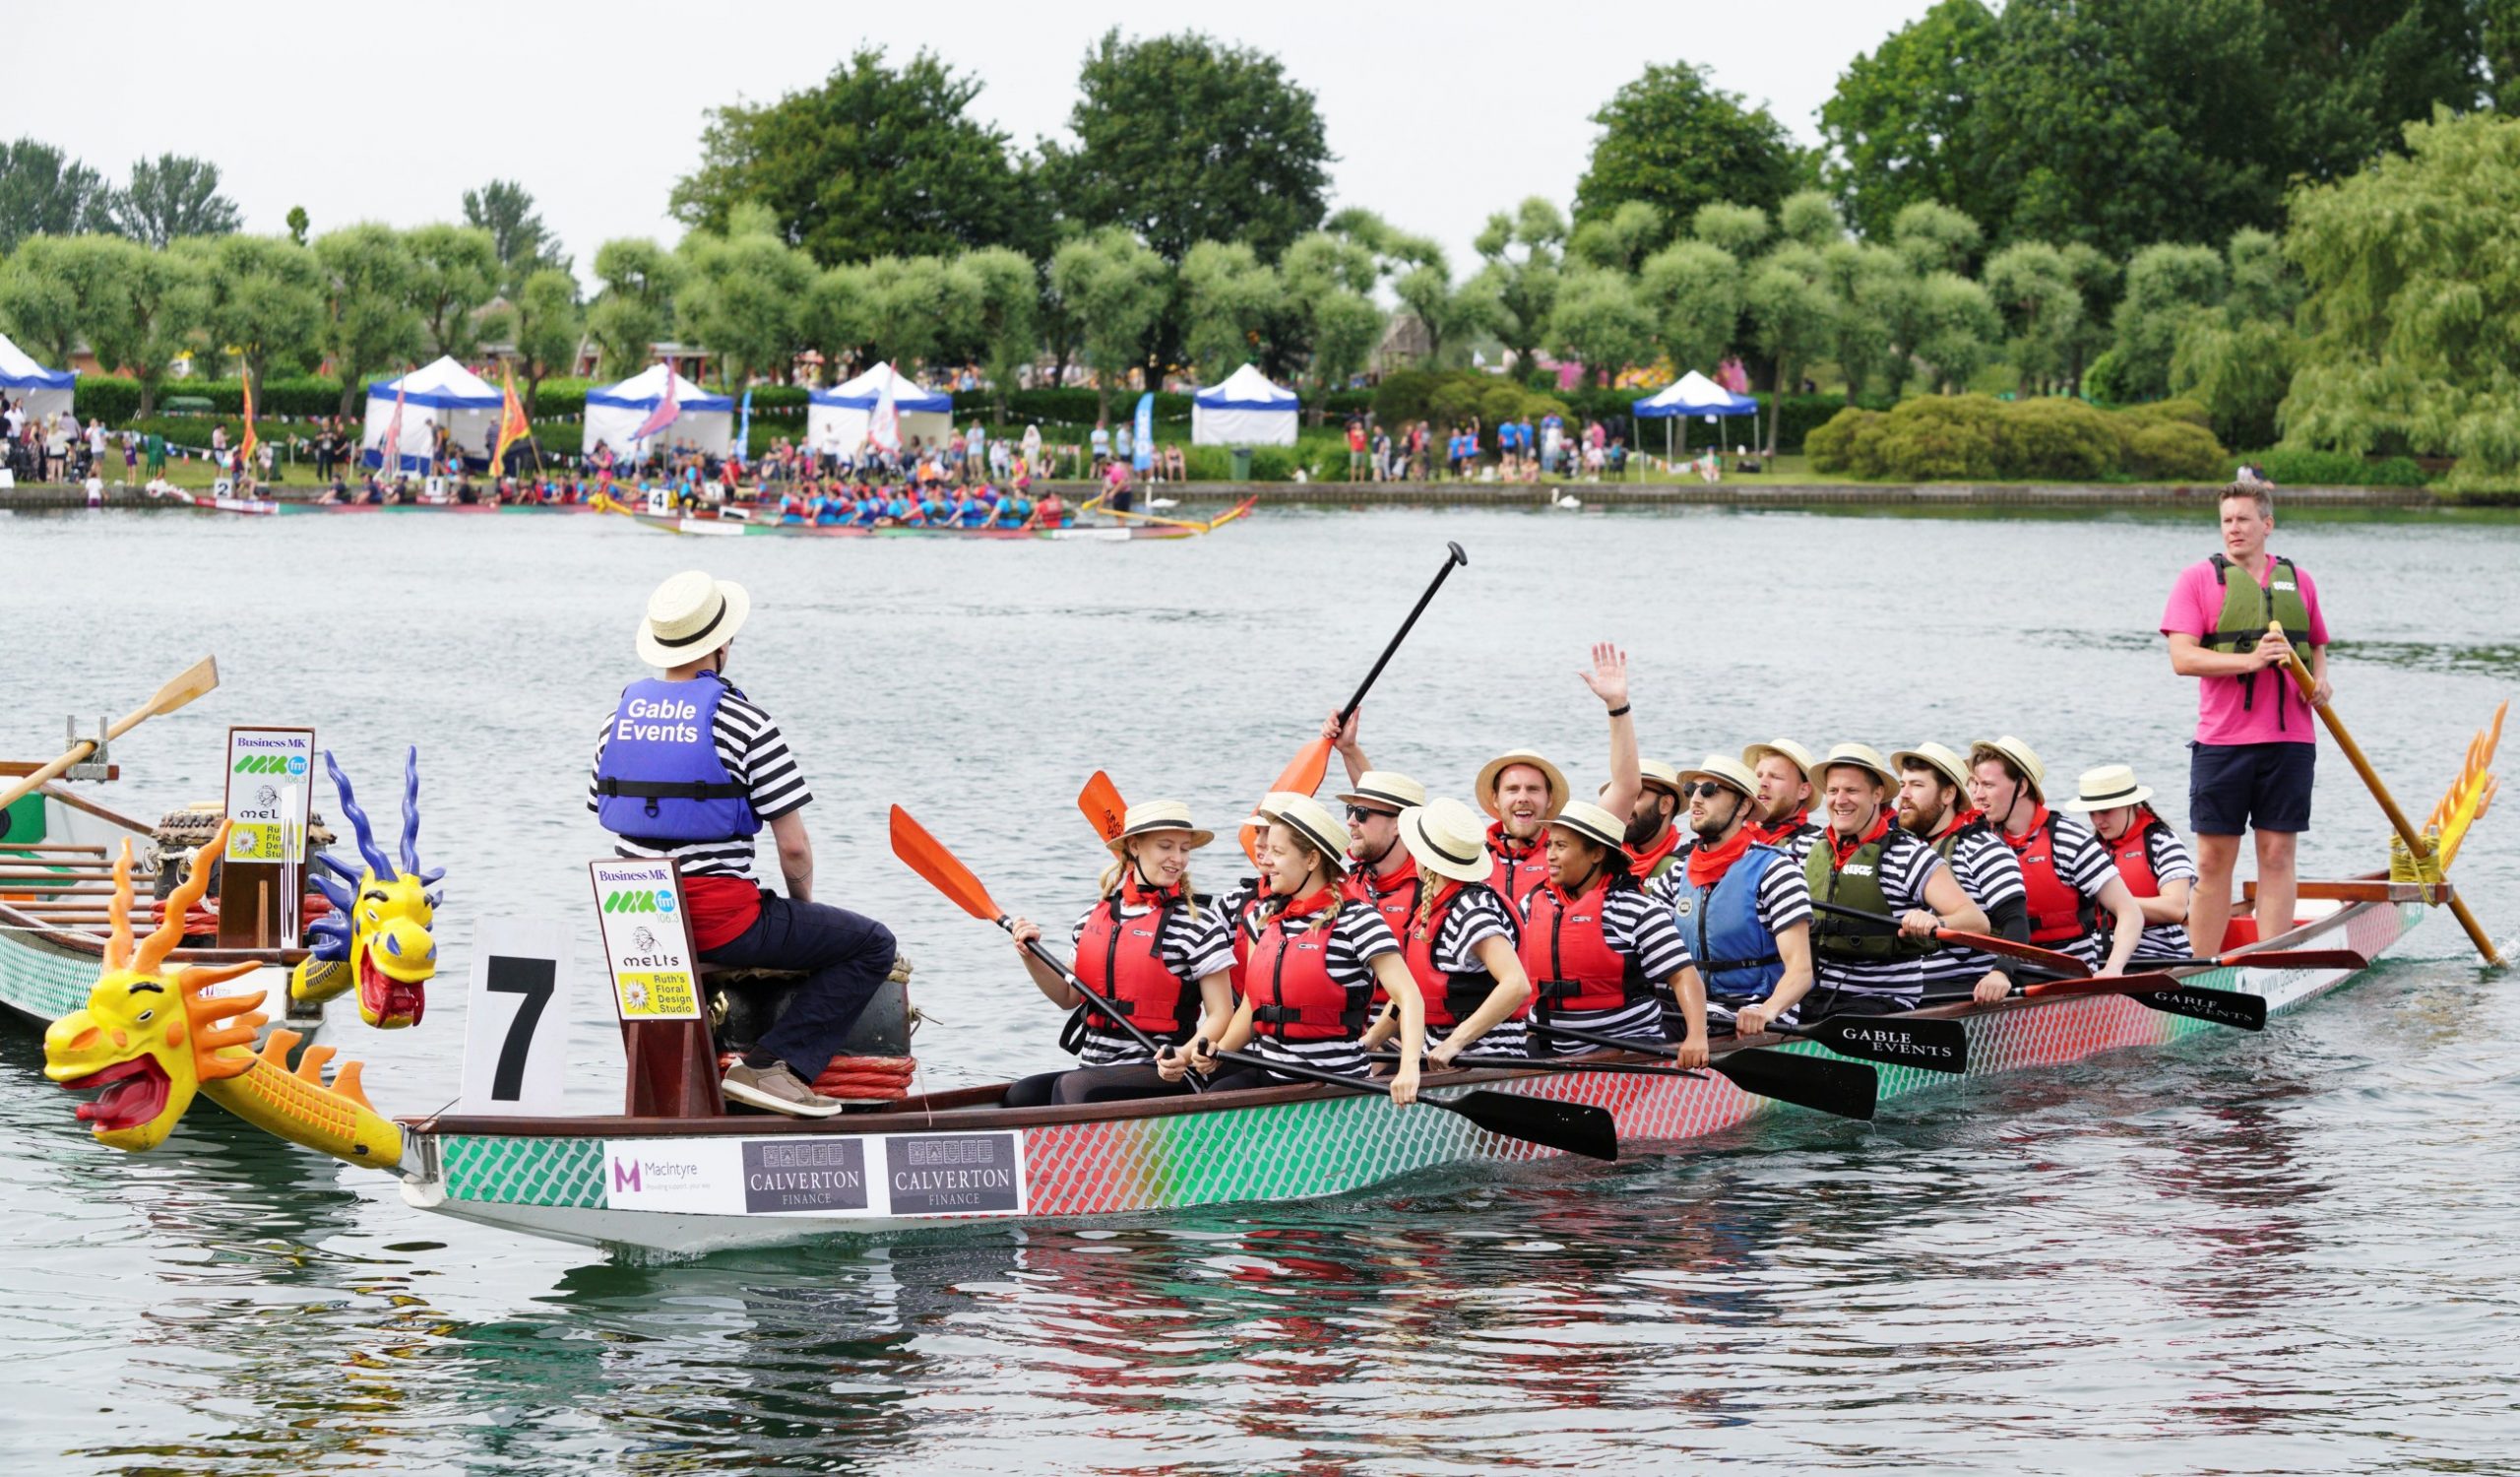 Milton Keynes Dragon Boat Festival is coming to Willen Lake for 19th